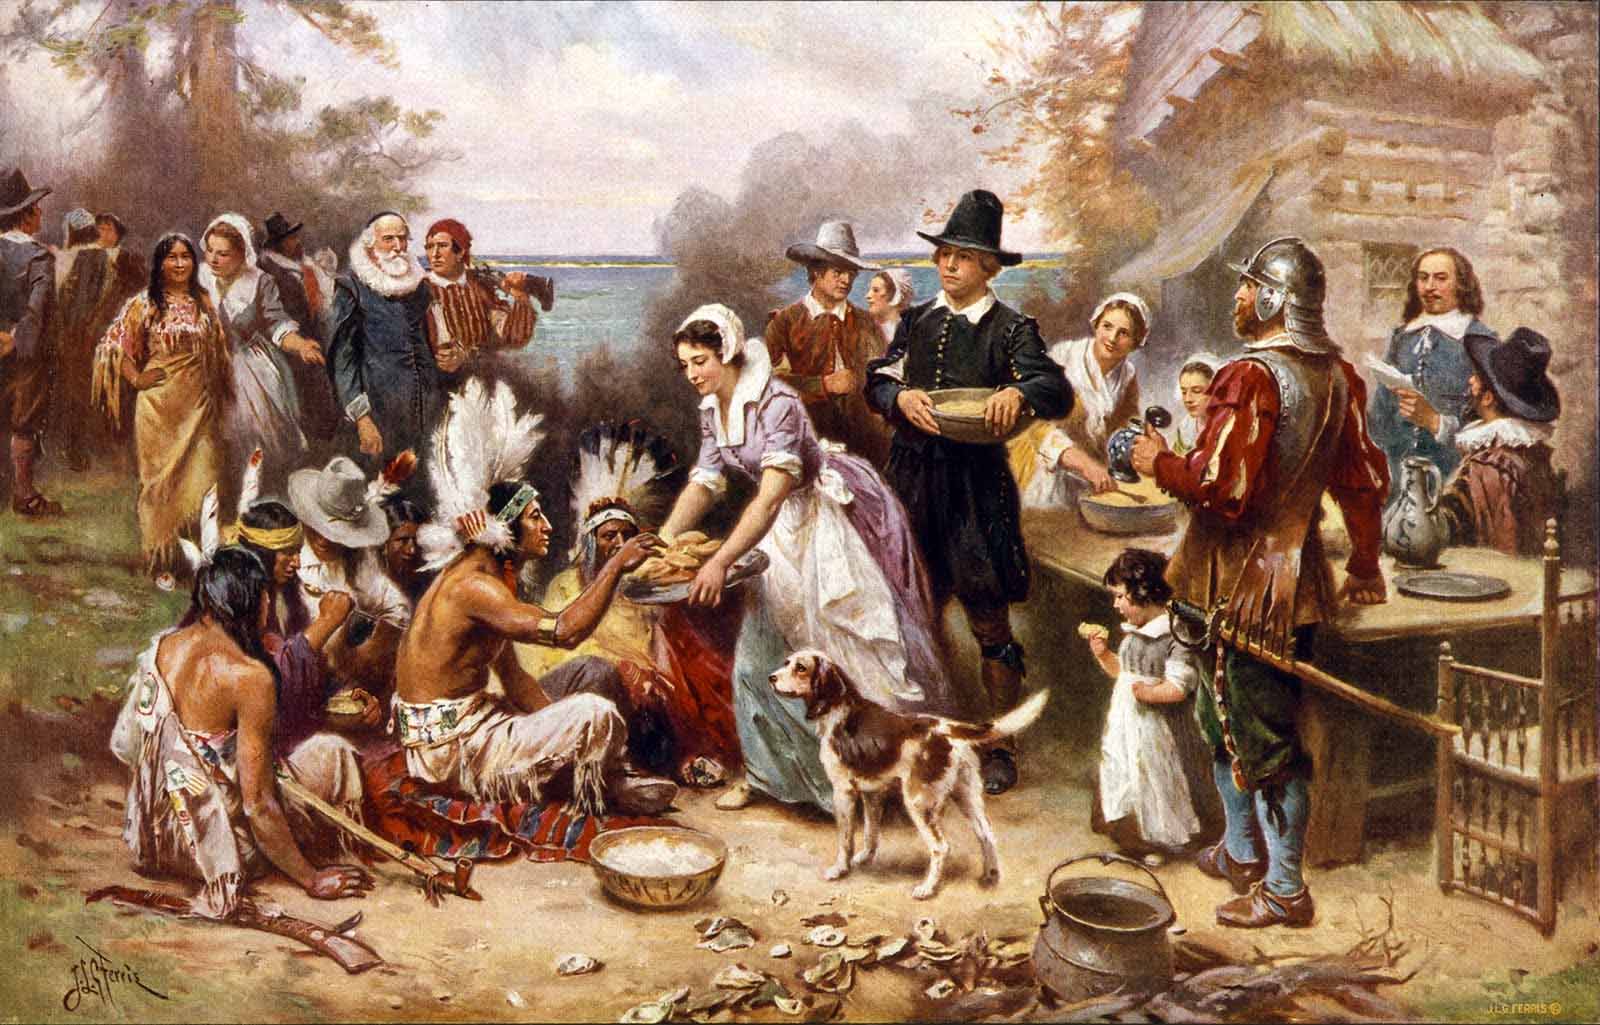 The Image of the First Thanksgiving Day